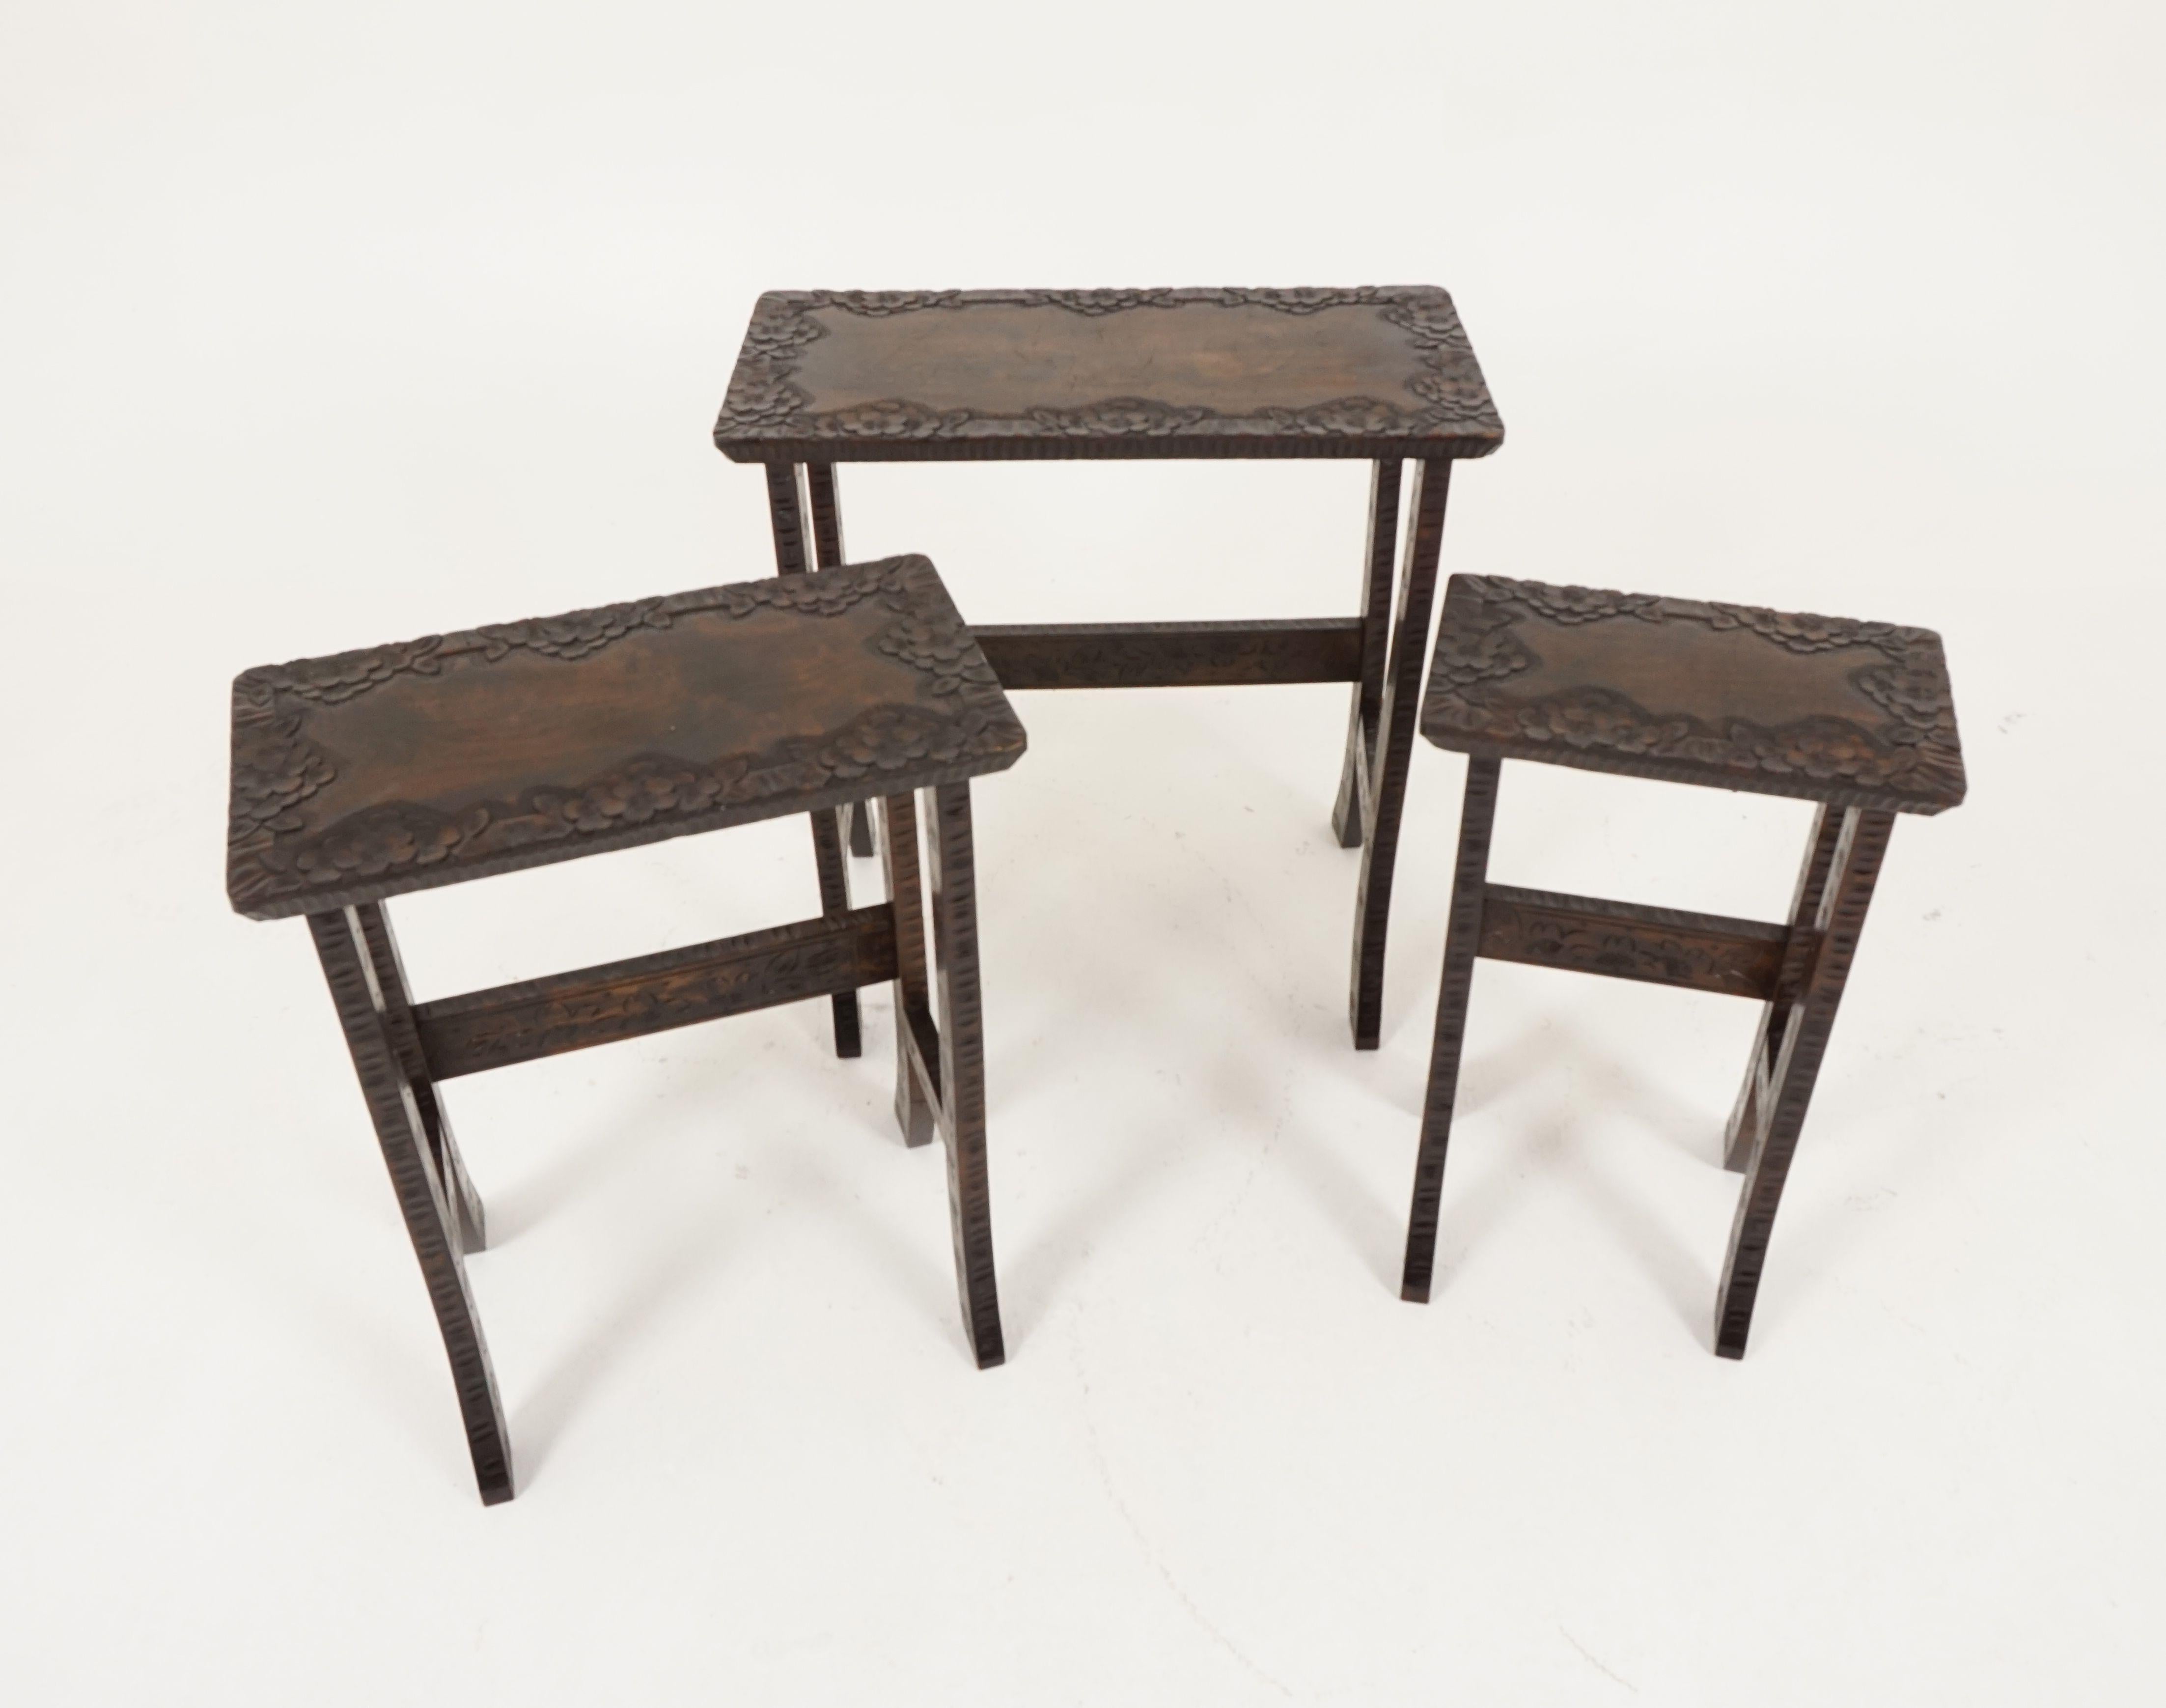 Hand-Crafted Antique Carved Liberty + Co, Asian Nesting Tables, Solid Wood, Asia 1920, B2289